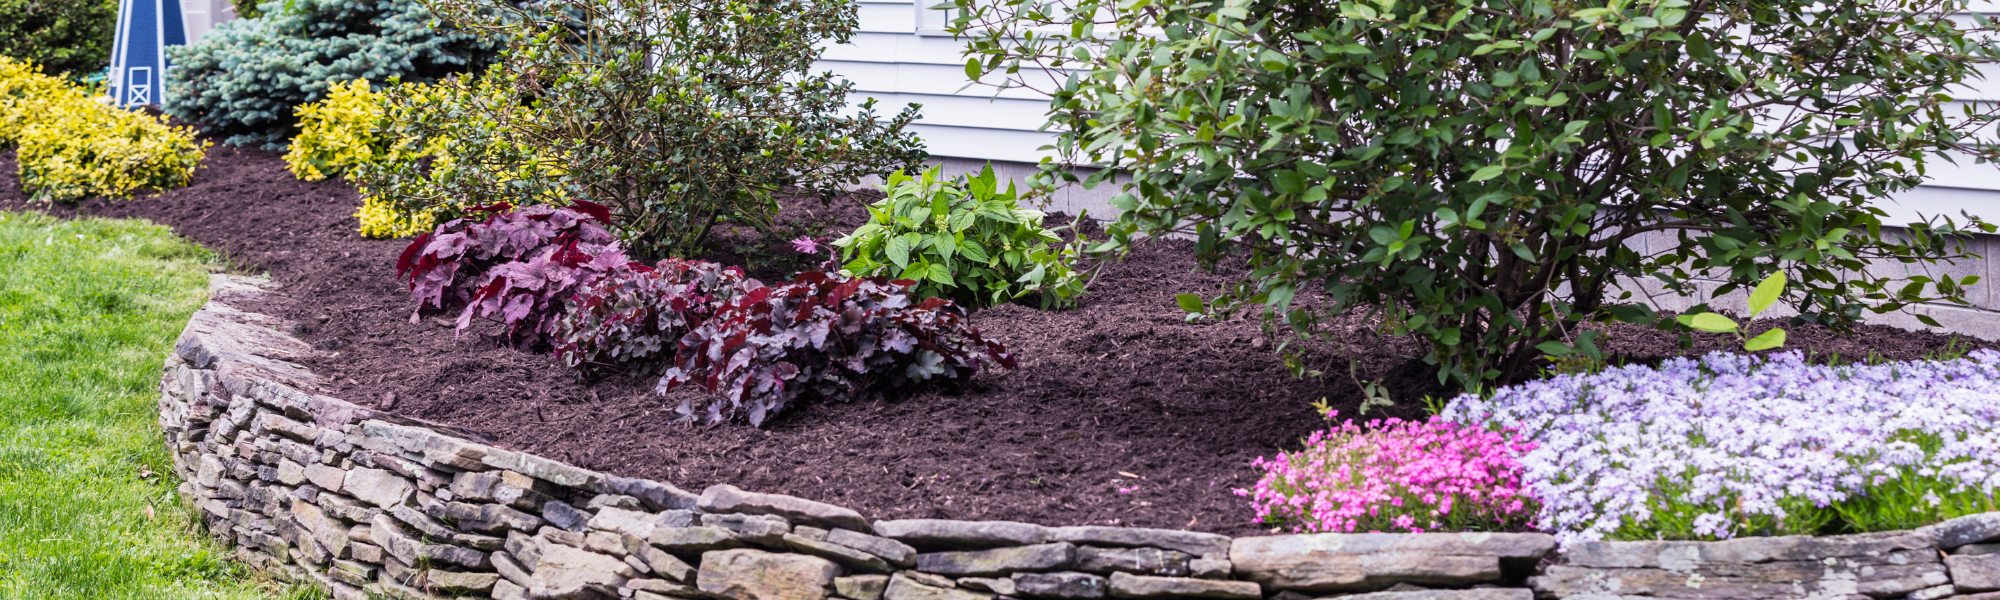 residential landscaping with rubber mulch